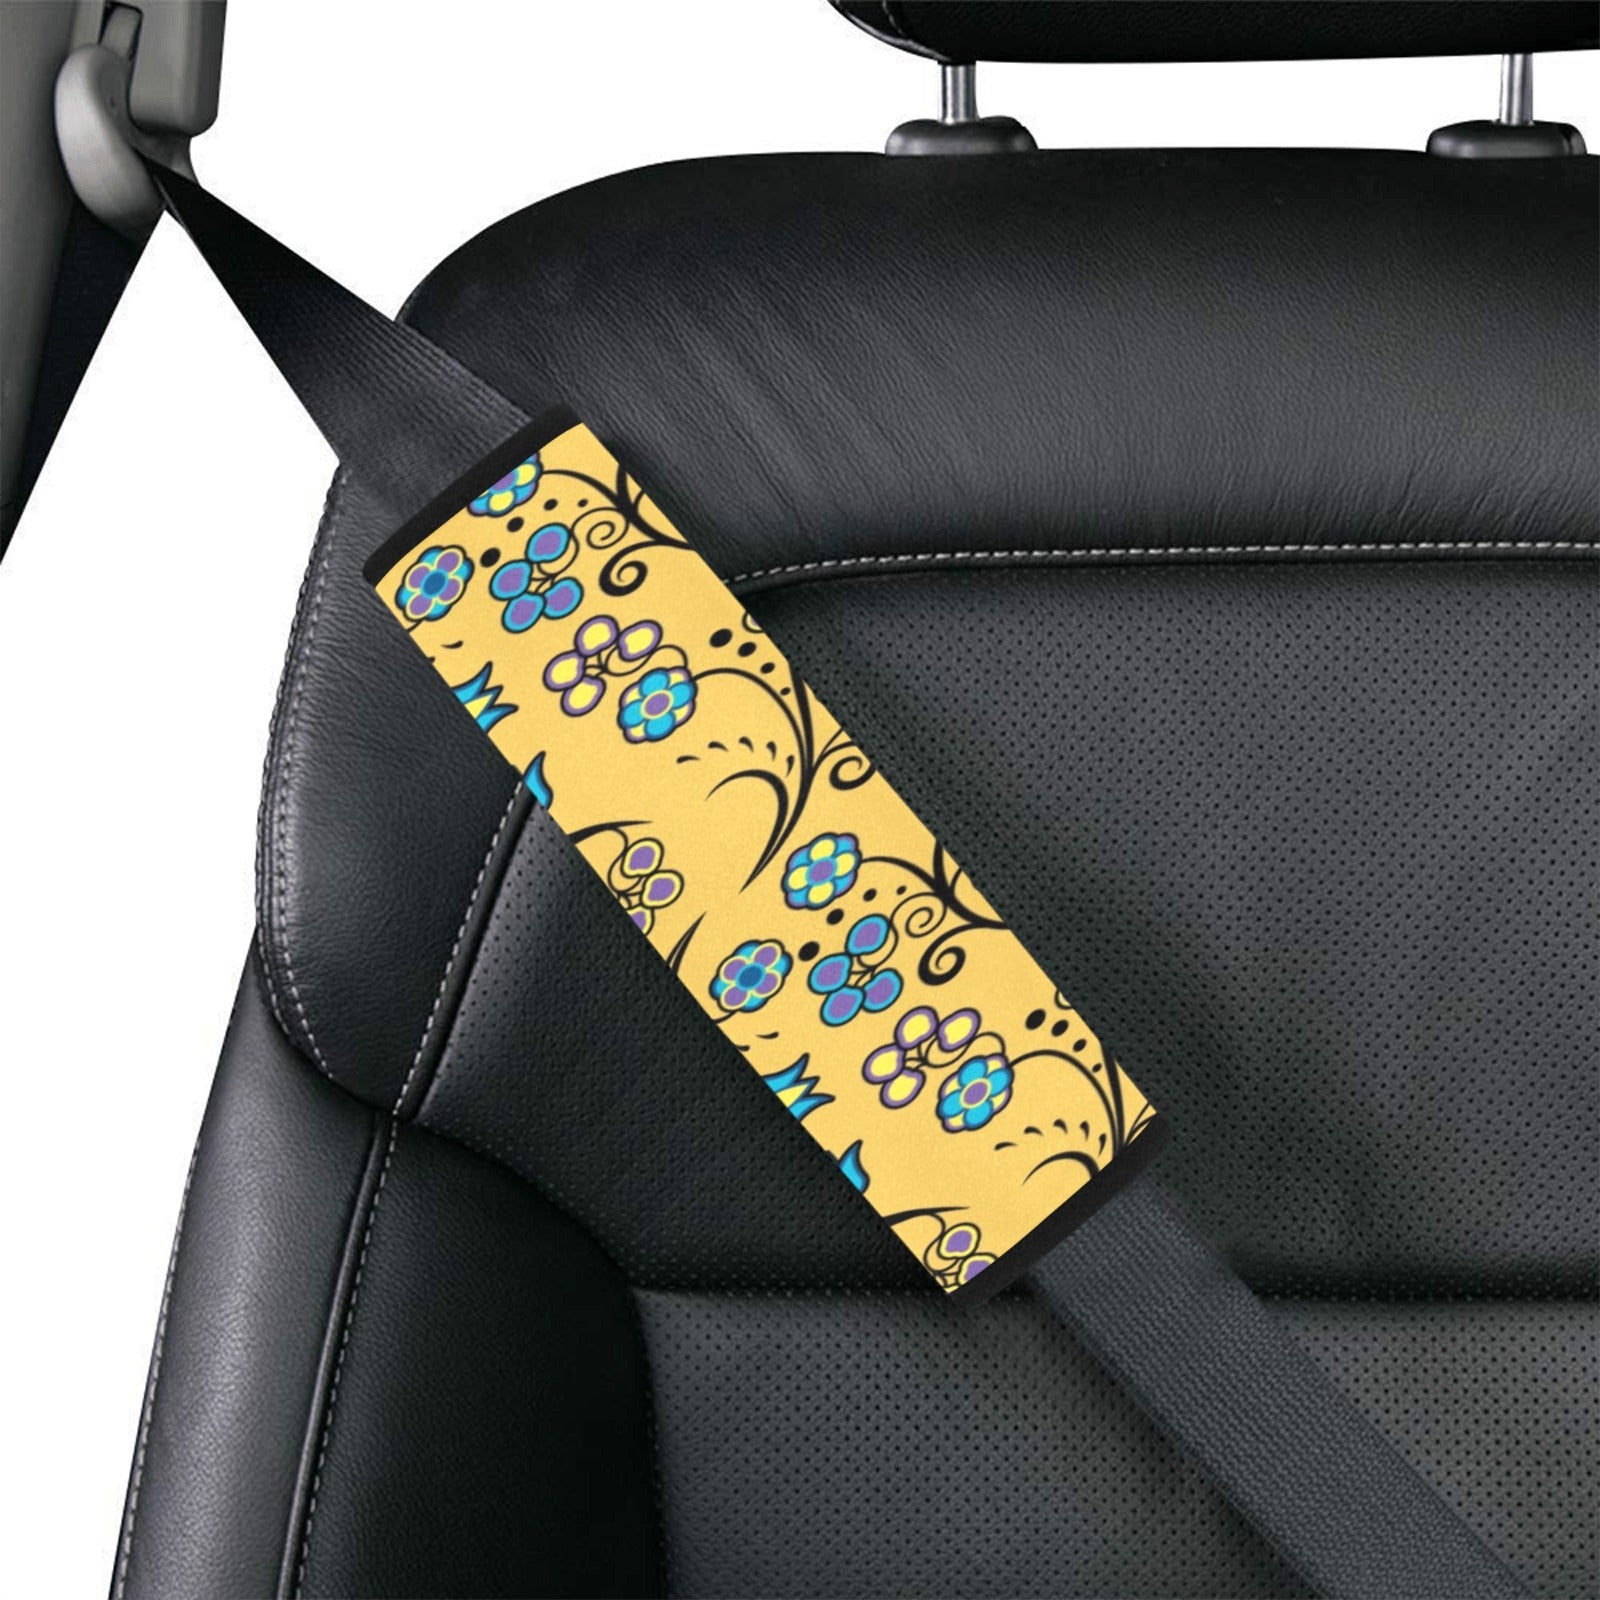 Blue Trio Tuscan Car Seat Belt Cover 7''x12.6'' (Pack of 2) Car Seat Belt Cover 7x12.6 (Pack of 2) e-joyer 